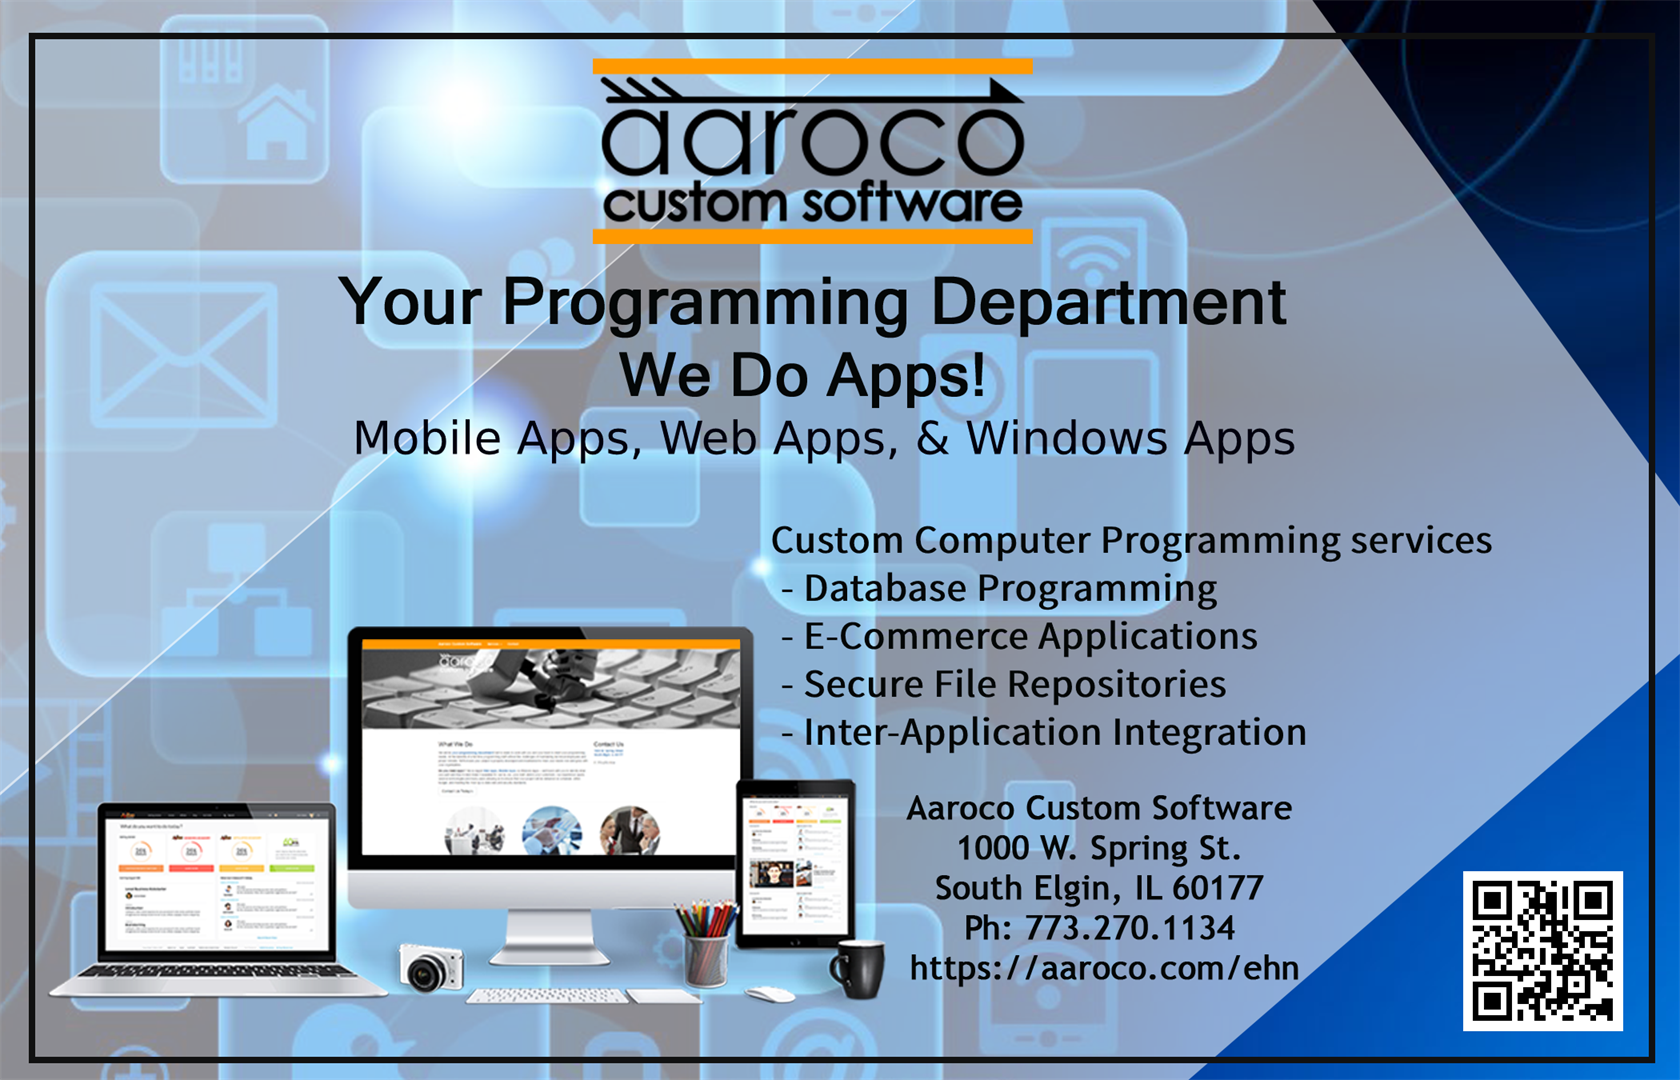 Web Apps, Windows Apps, & Mobile Apps - Custom Computer Programming Services